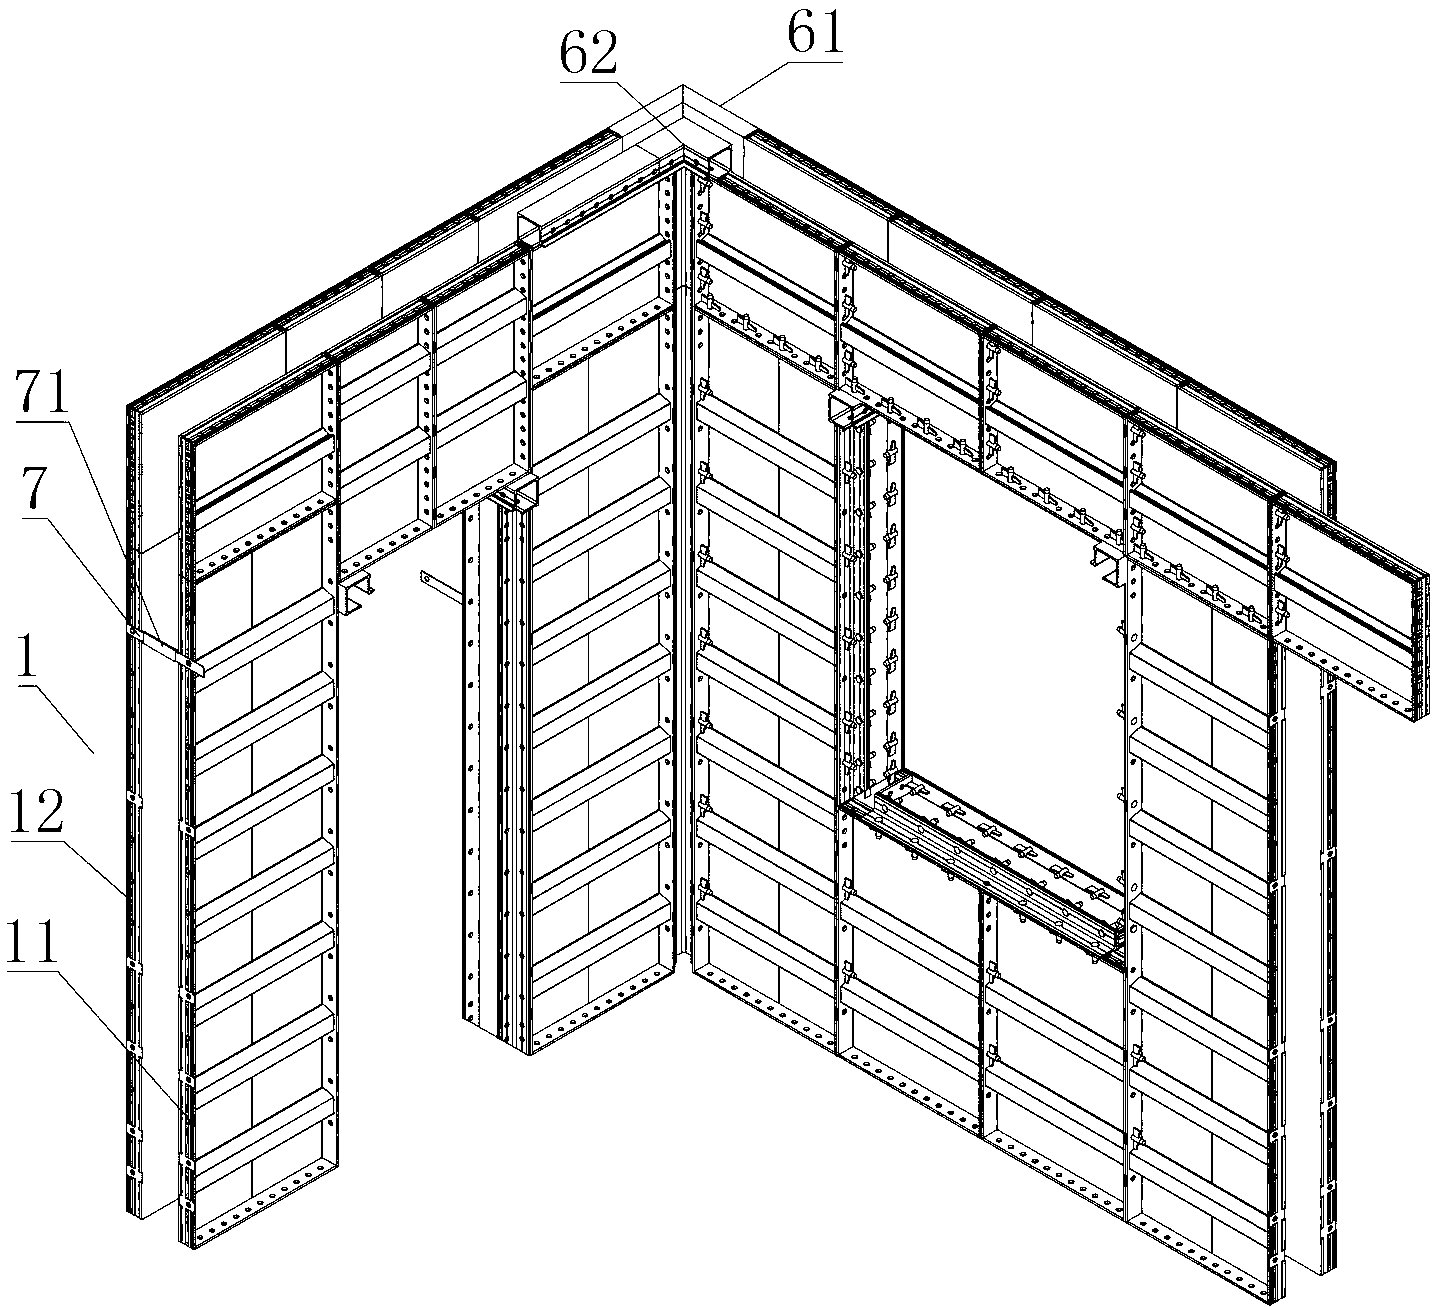 Aluminum template system for building